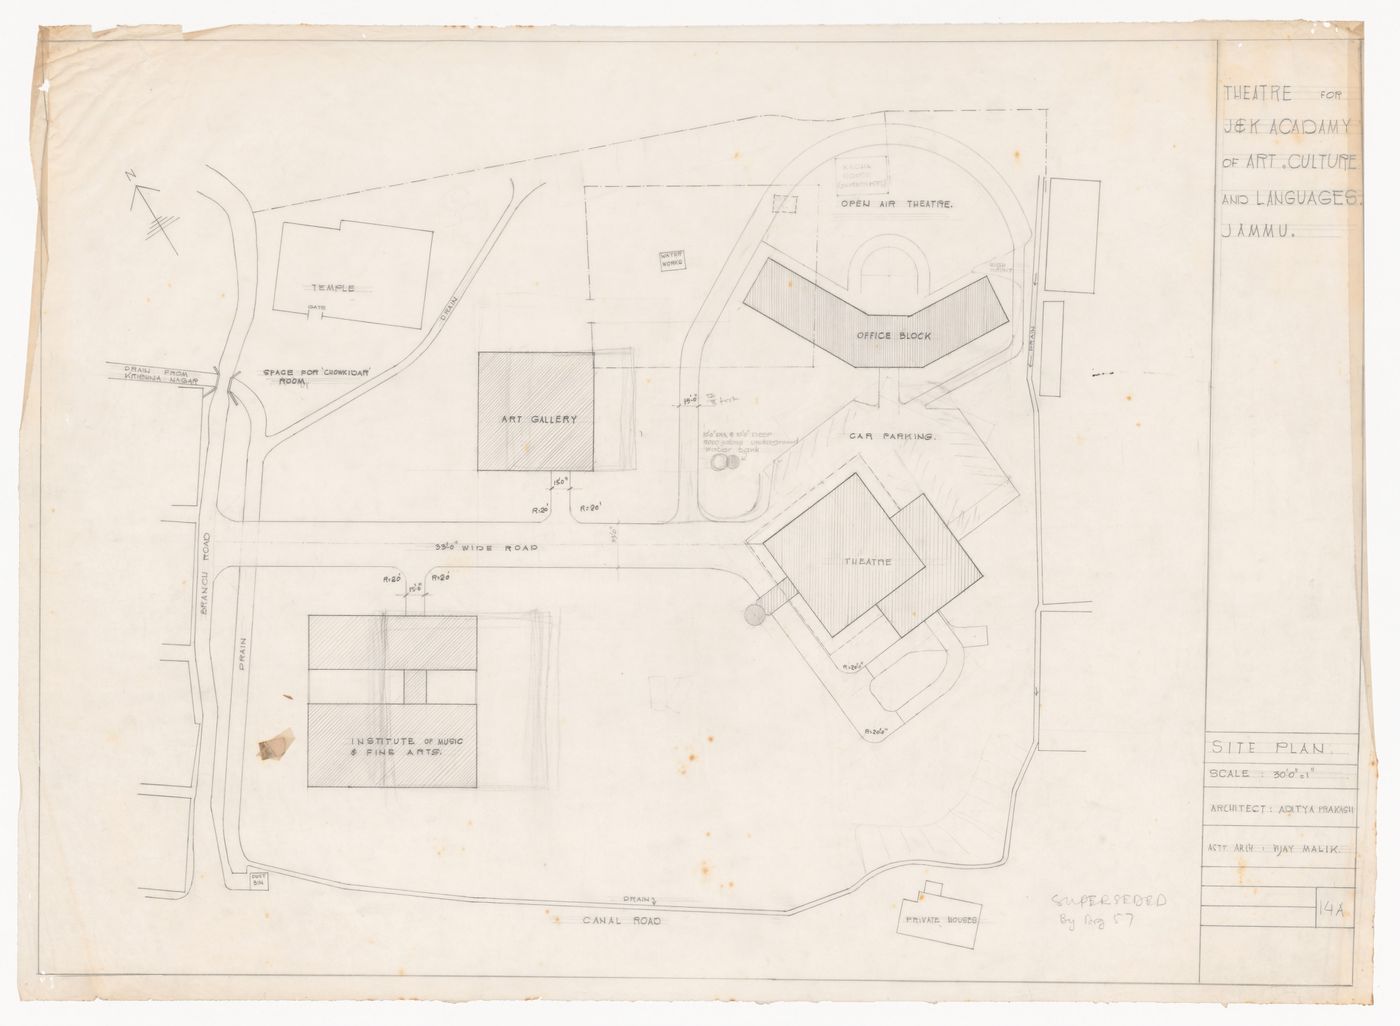 Site plan for Theatre for J&K Academy of Art, Culture and Languages, Jammu, India